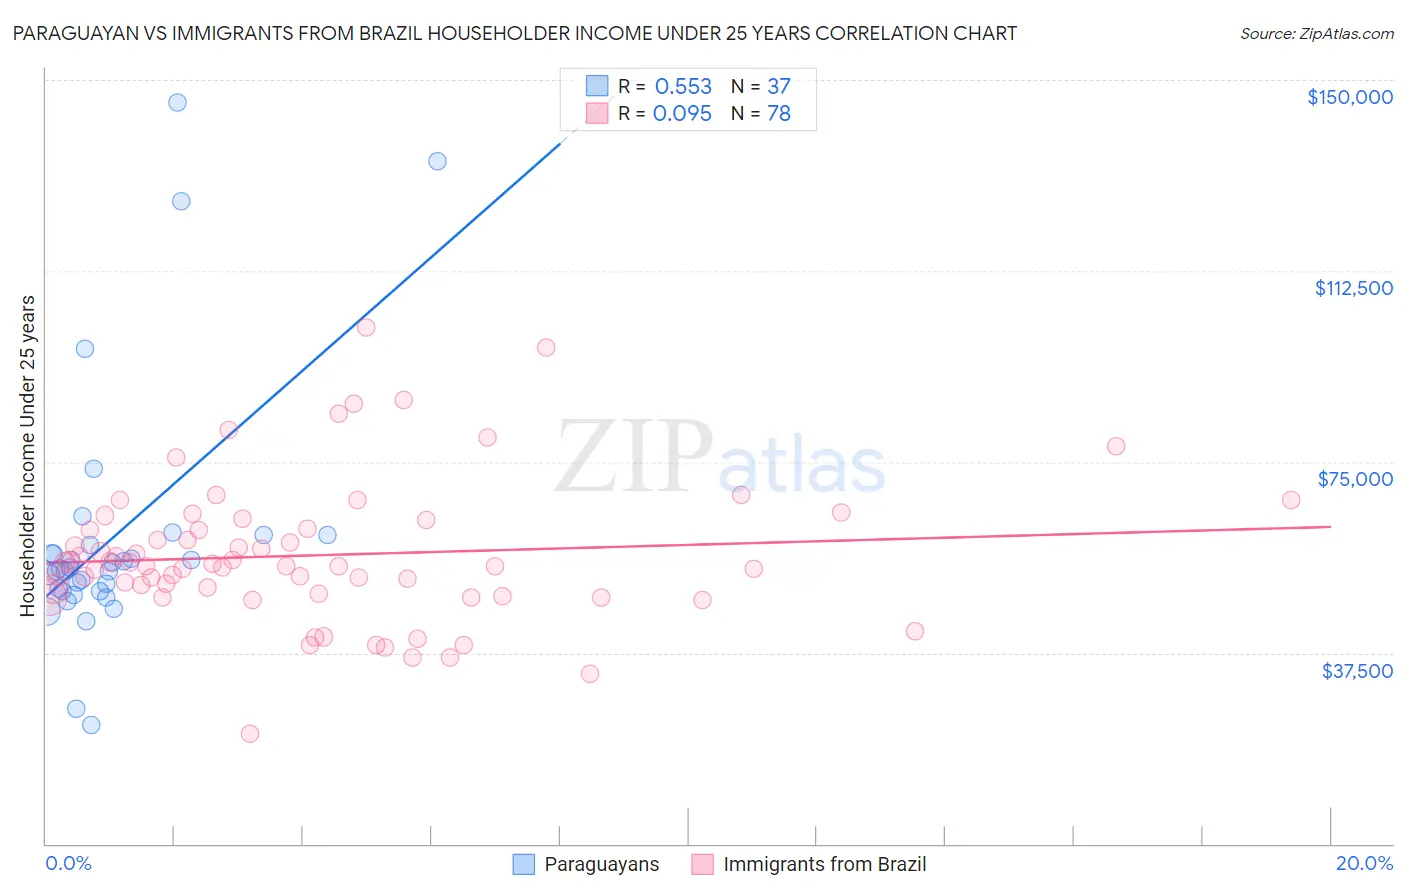 Paraguayan vs Immigrants from Brazil Householder Income Under 25 years